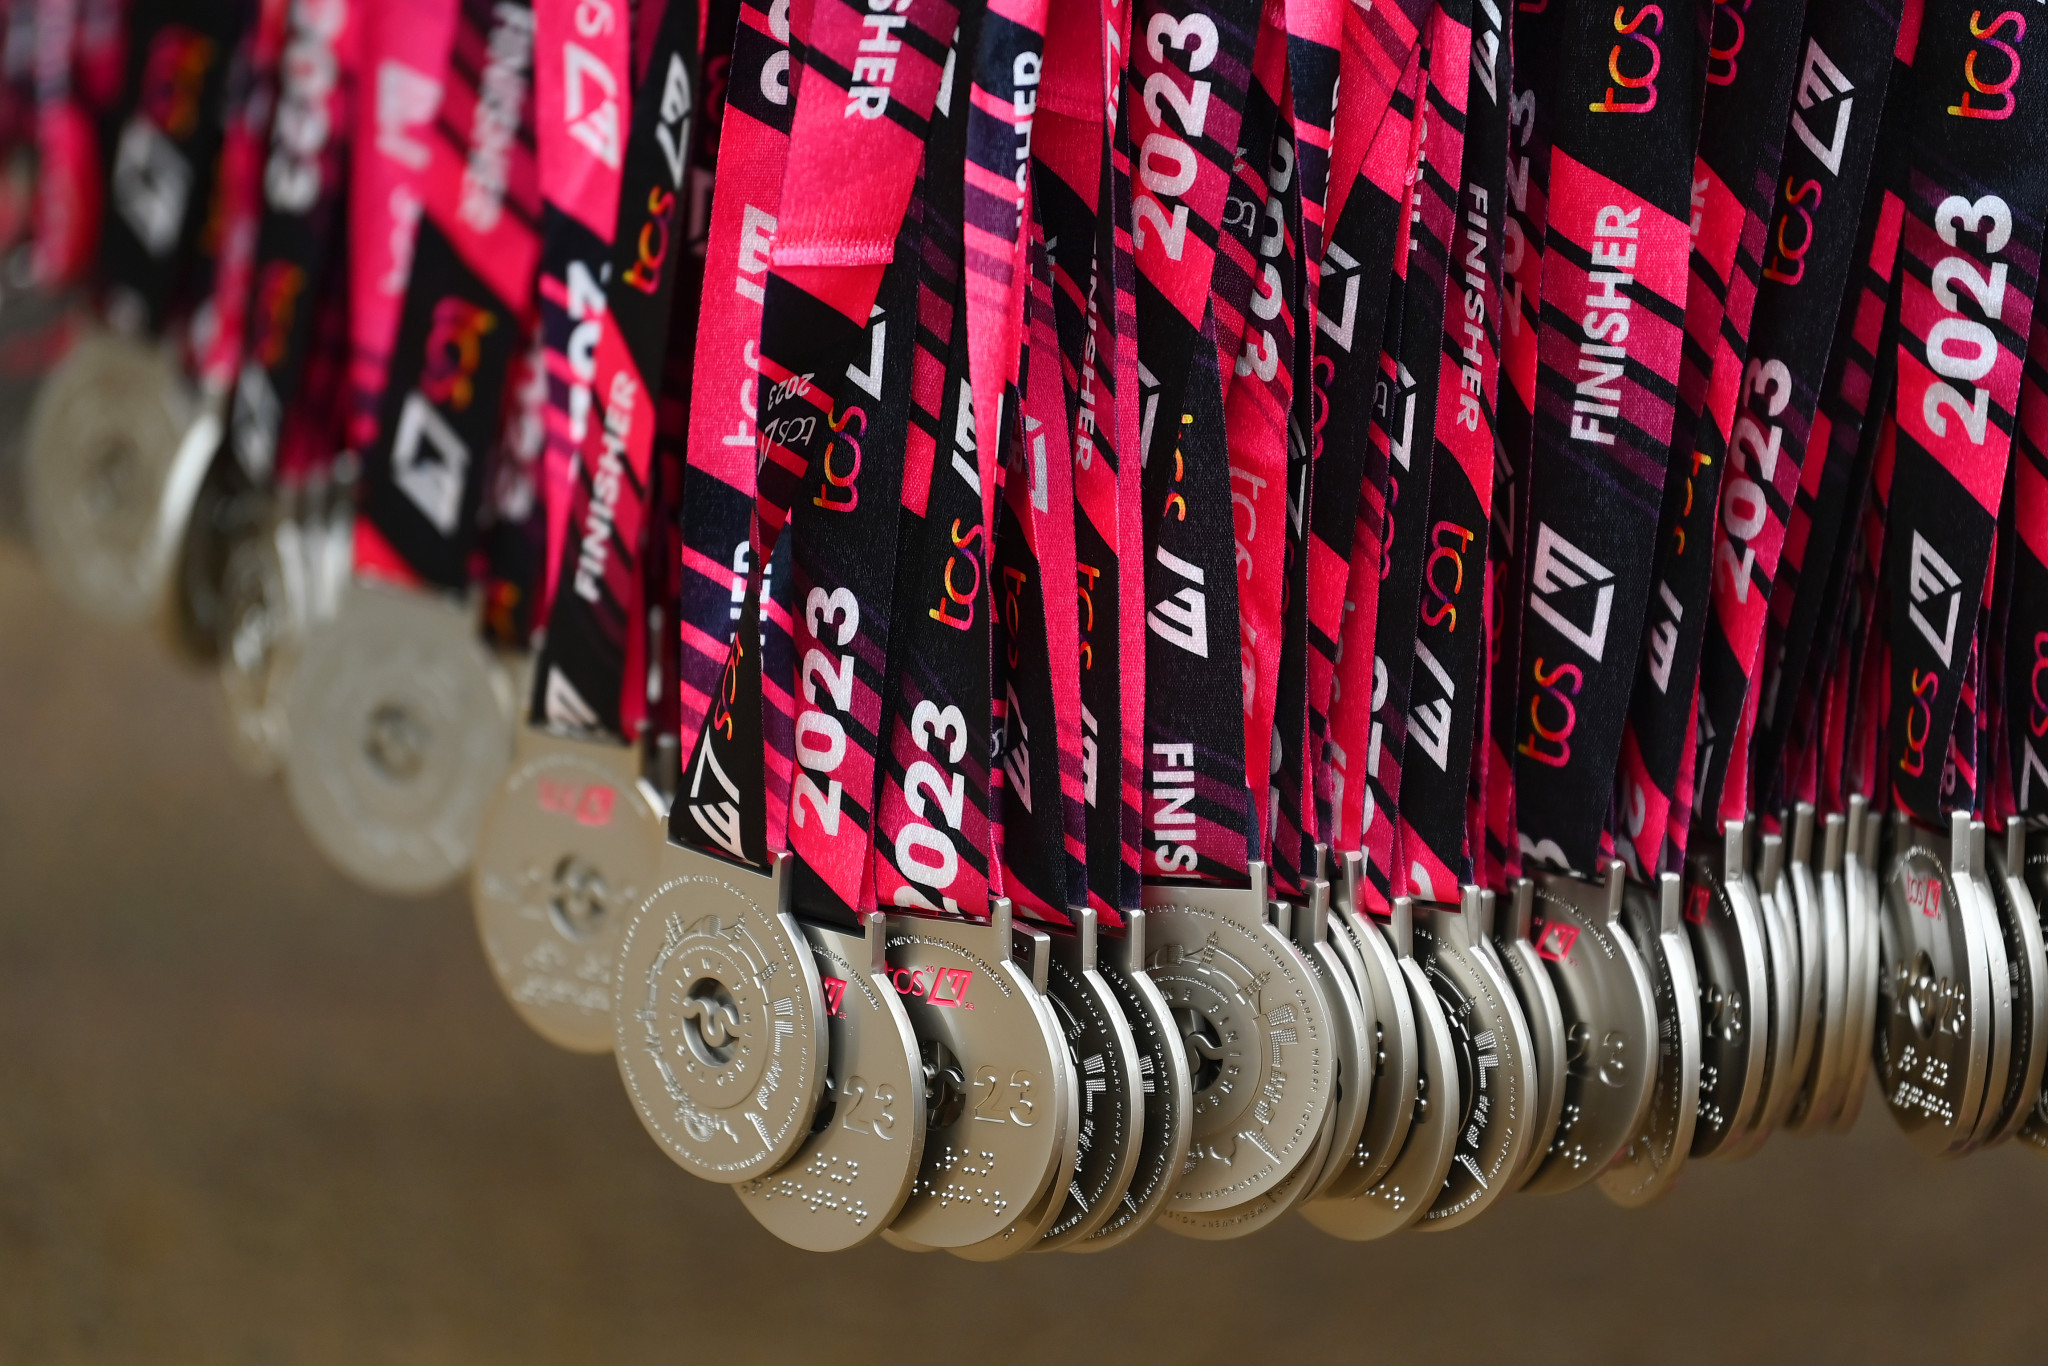 Every finisher of the London Marathon receives a medal in recognition of completing the course ©Getty Images